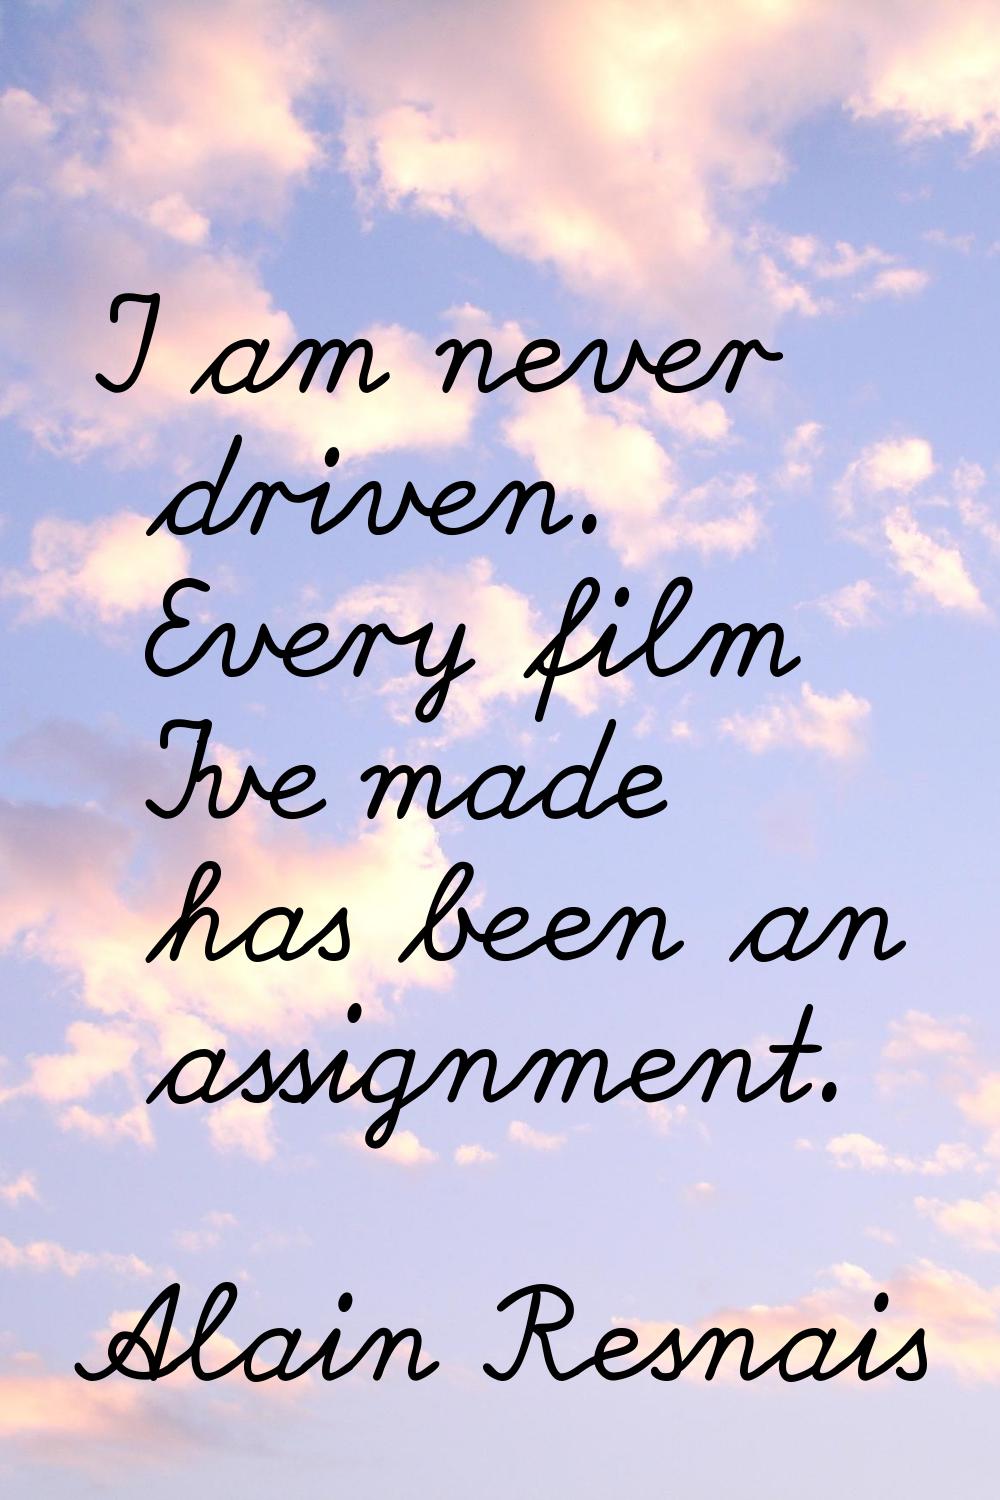 I am never driven. Every film I've made has been an assignment.